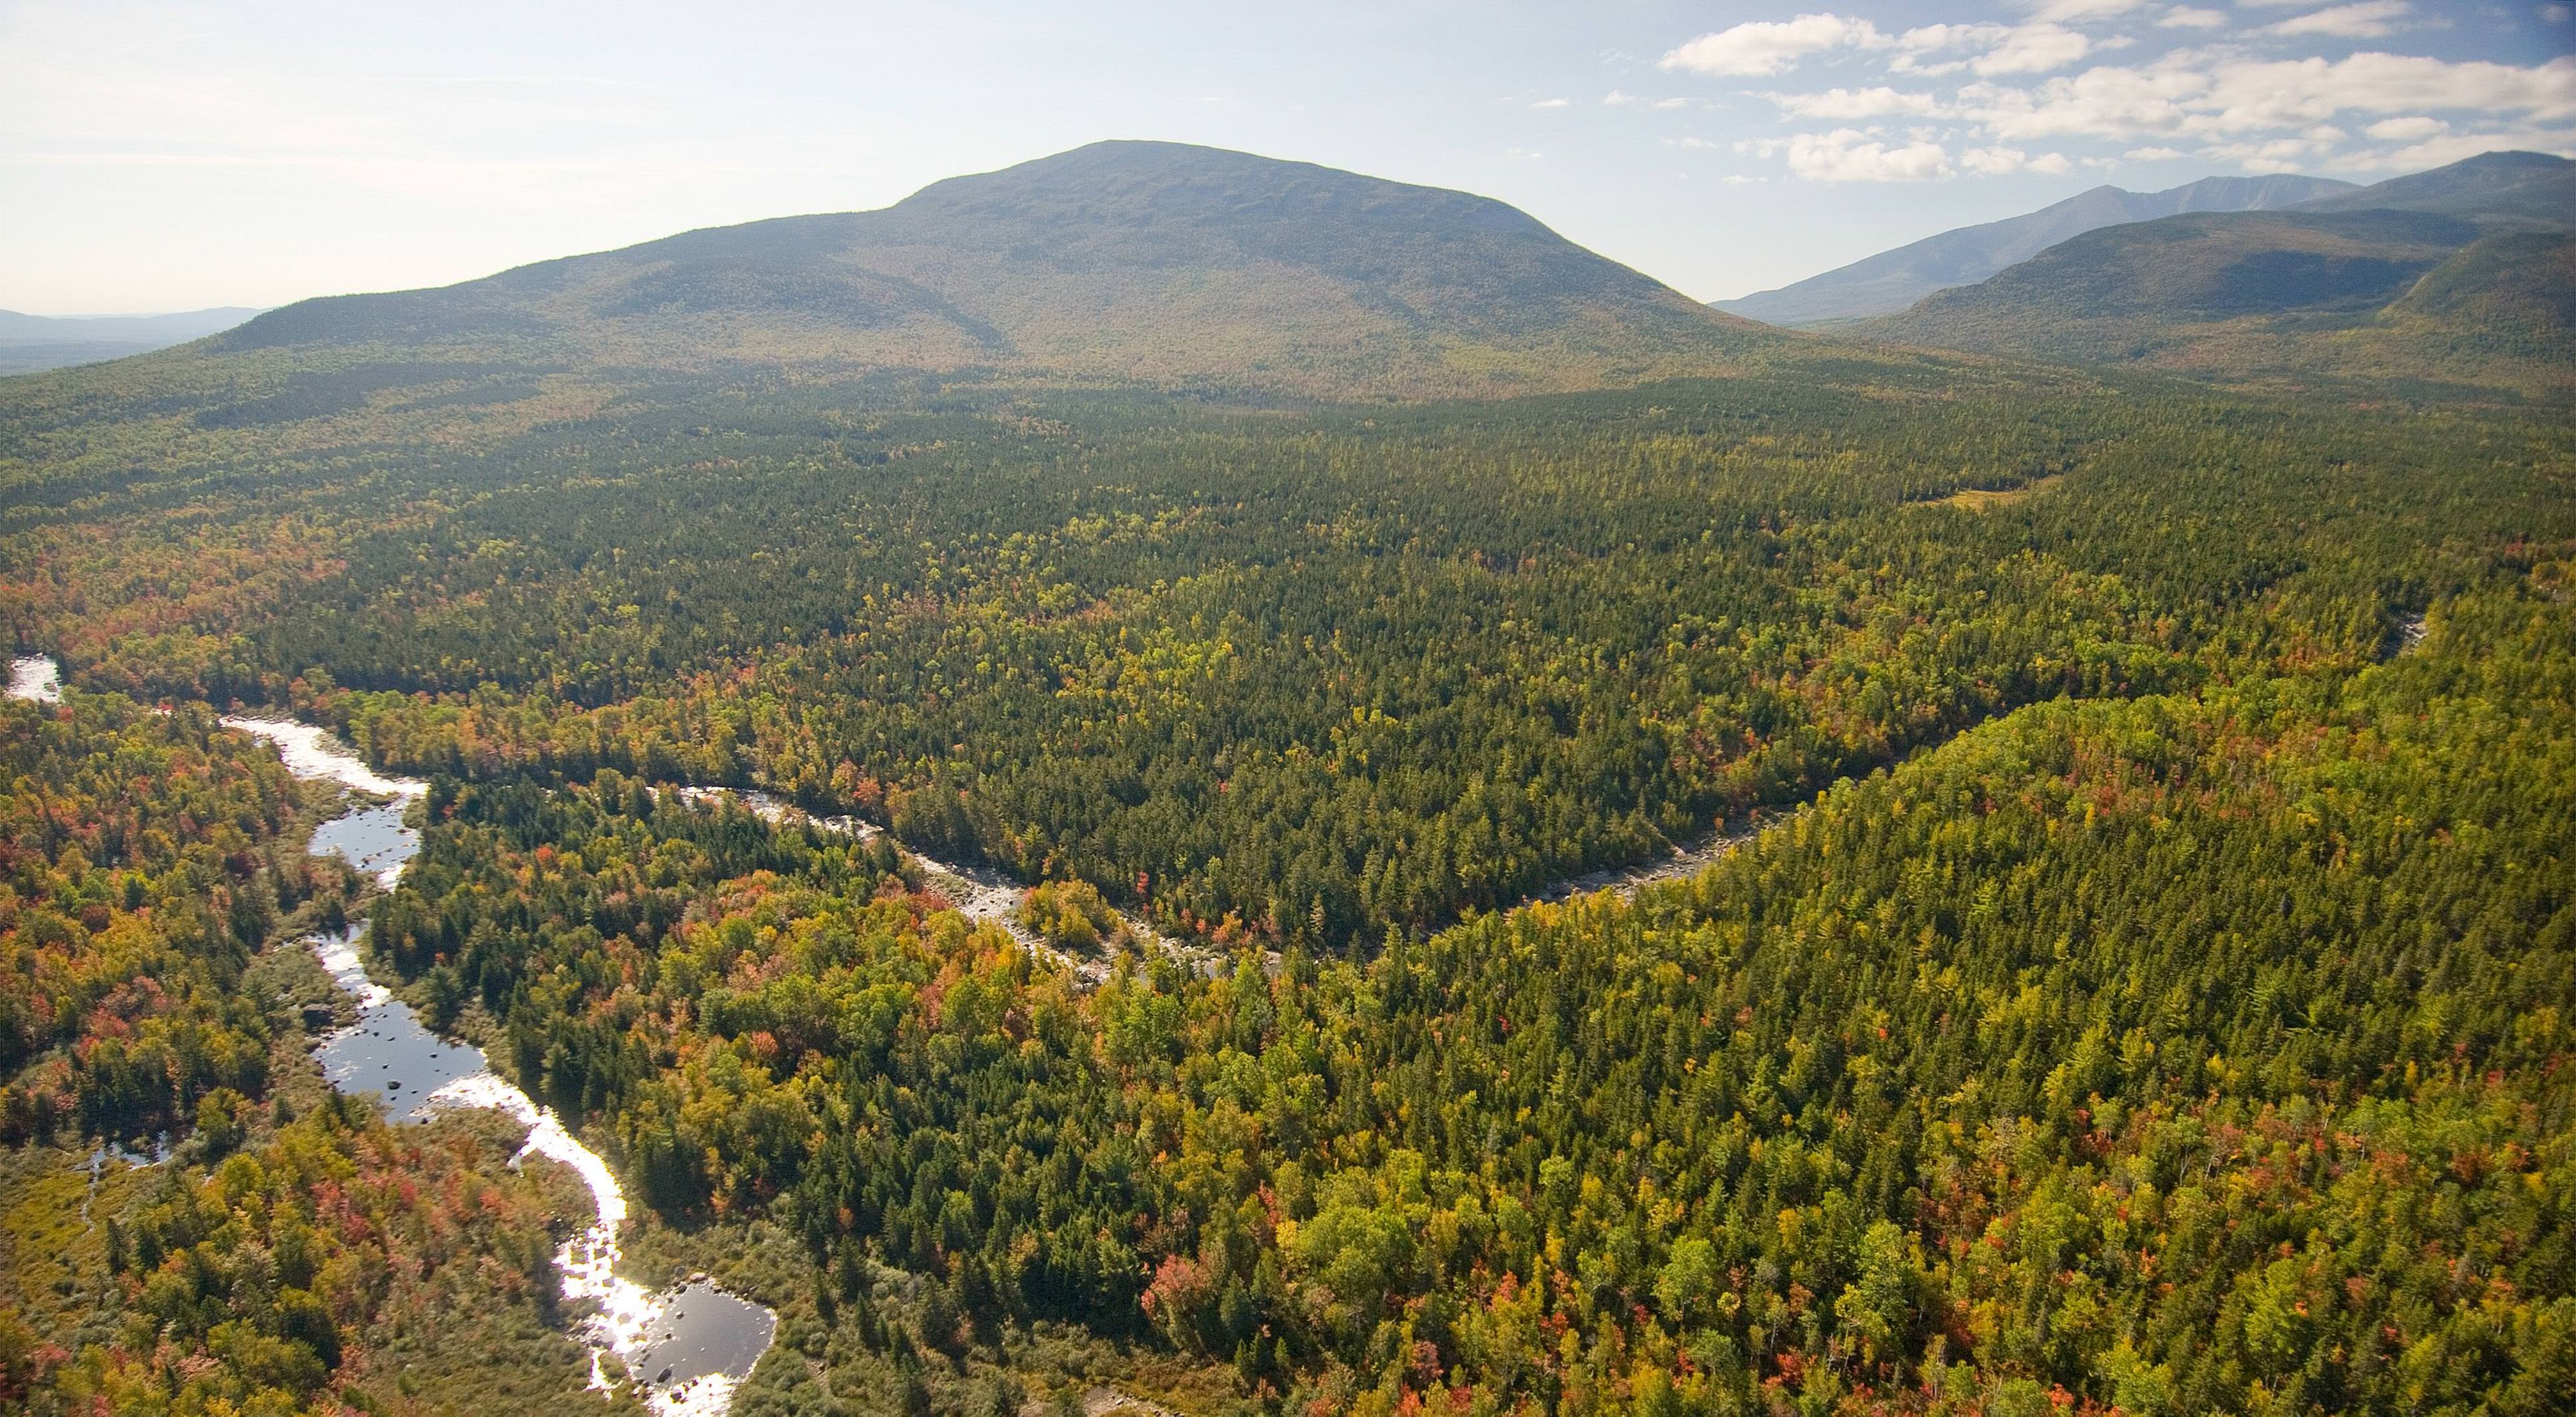 West Branch of the Penobscot River and tributaries as it winds to the southeast of Mount Katahdin.